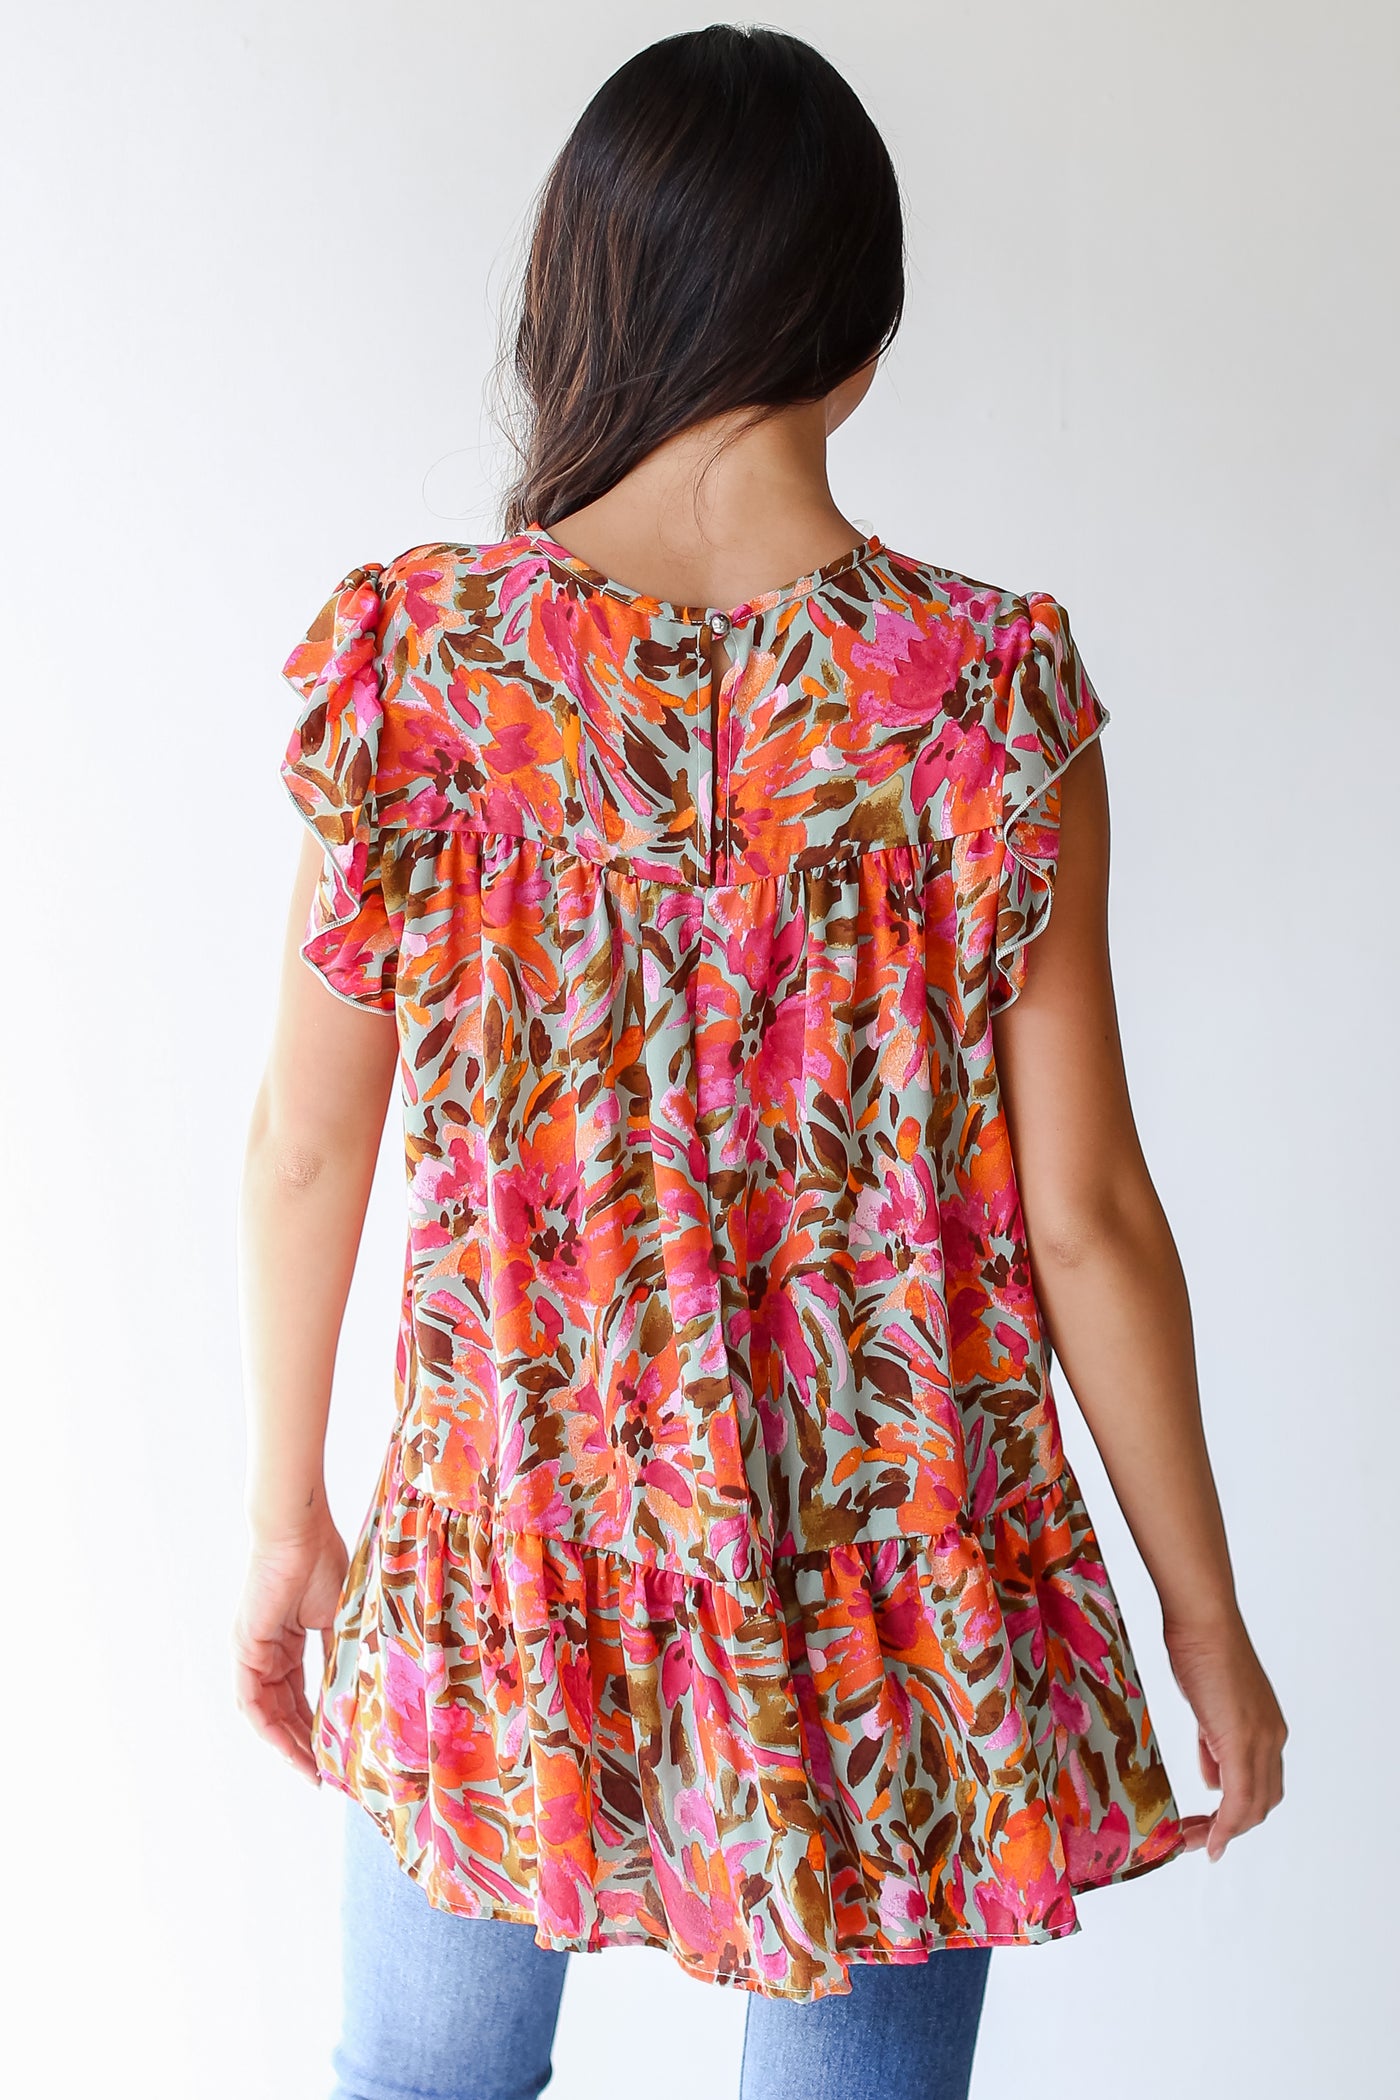 Tiered Floral Blouse back view